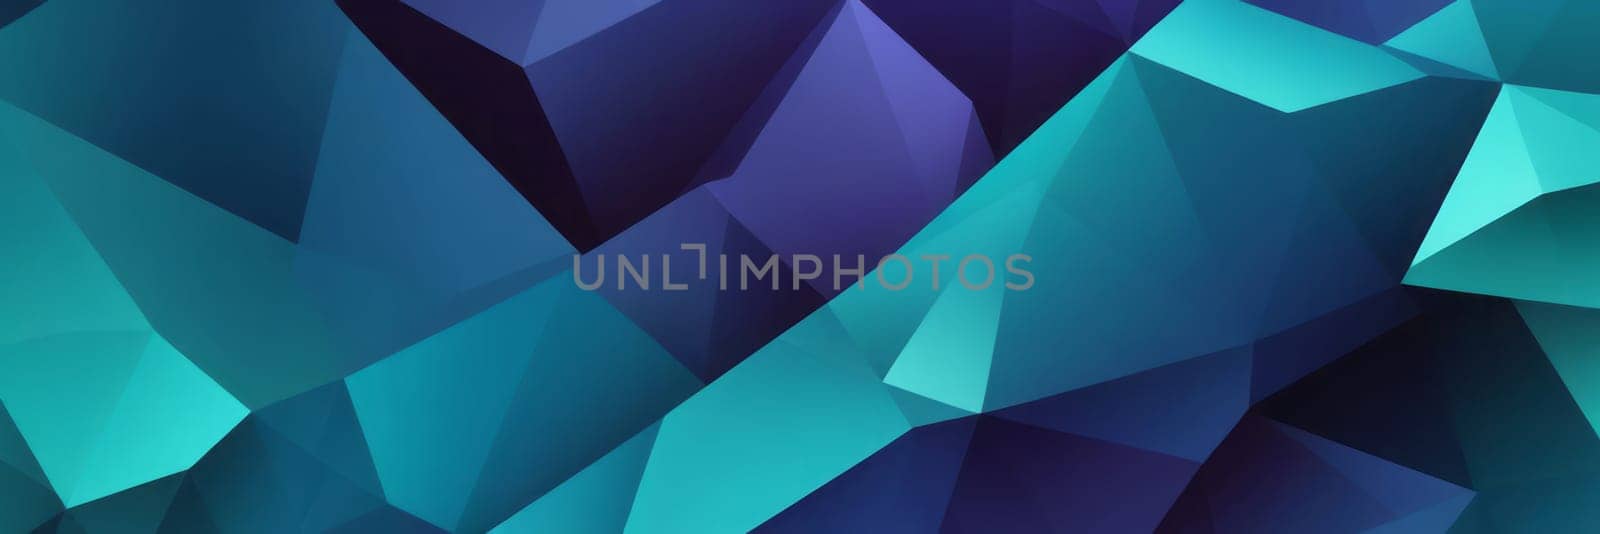 Crystalline Shapes in Teal and Dark blue by nkotlyar